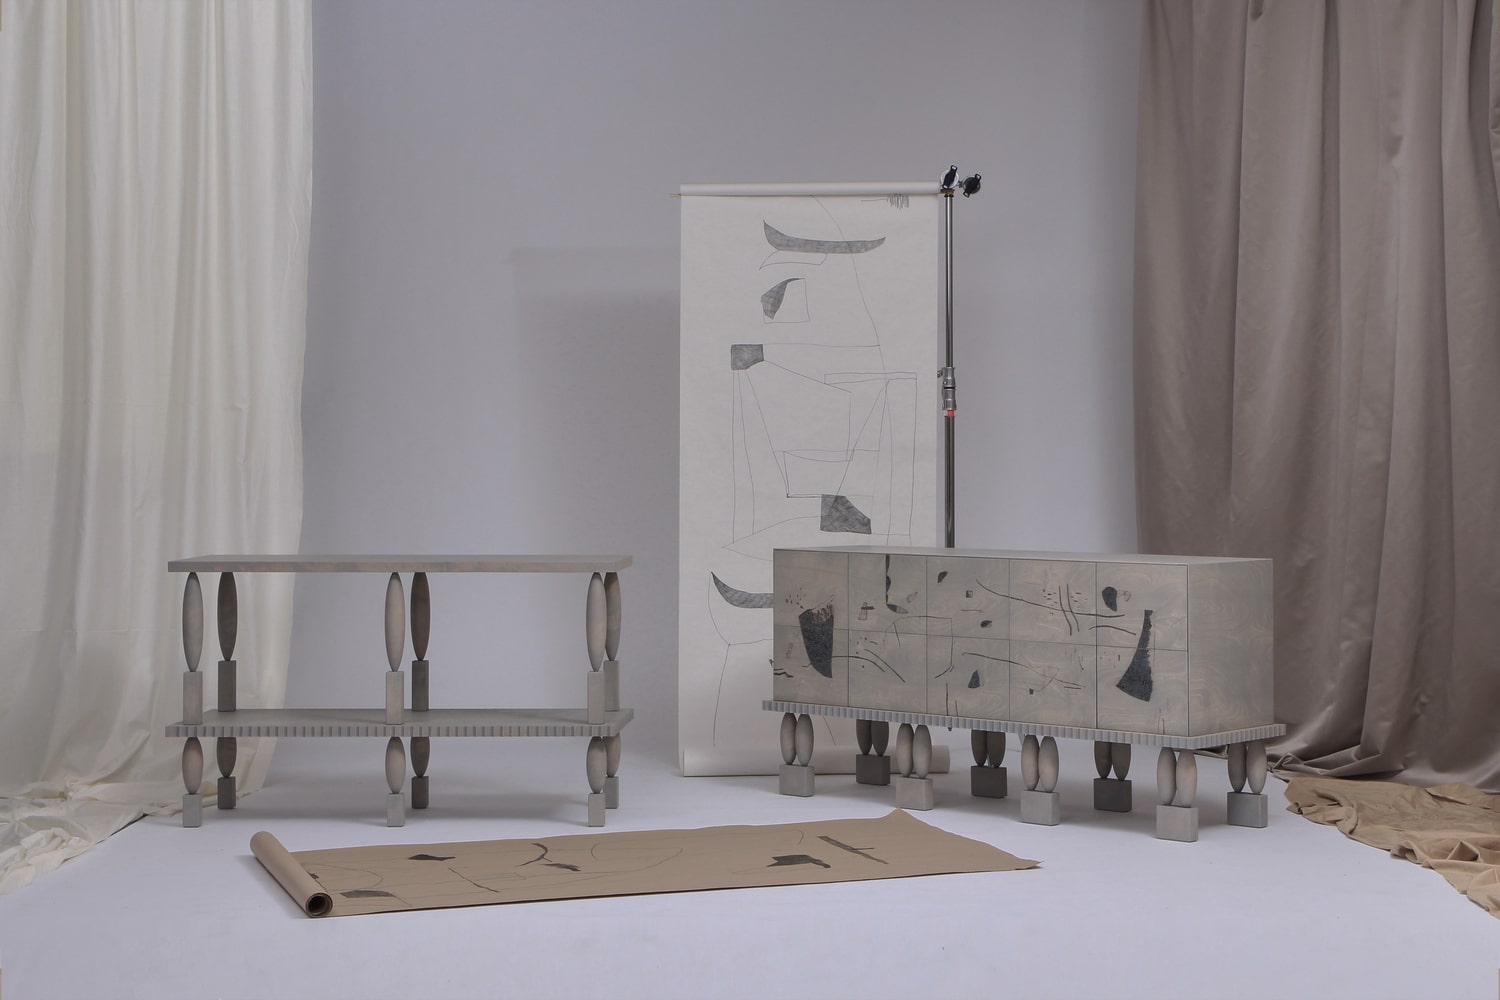 Nouveau Collection - Commode with Shelves and storage units by Jiri Krejcirik and pyrography drawings by Taja Spasskova